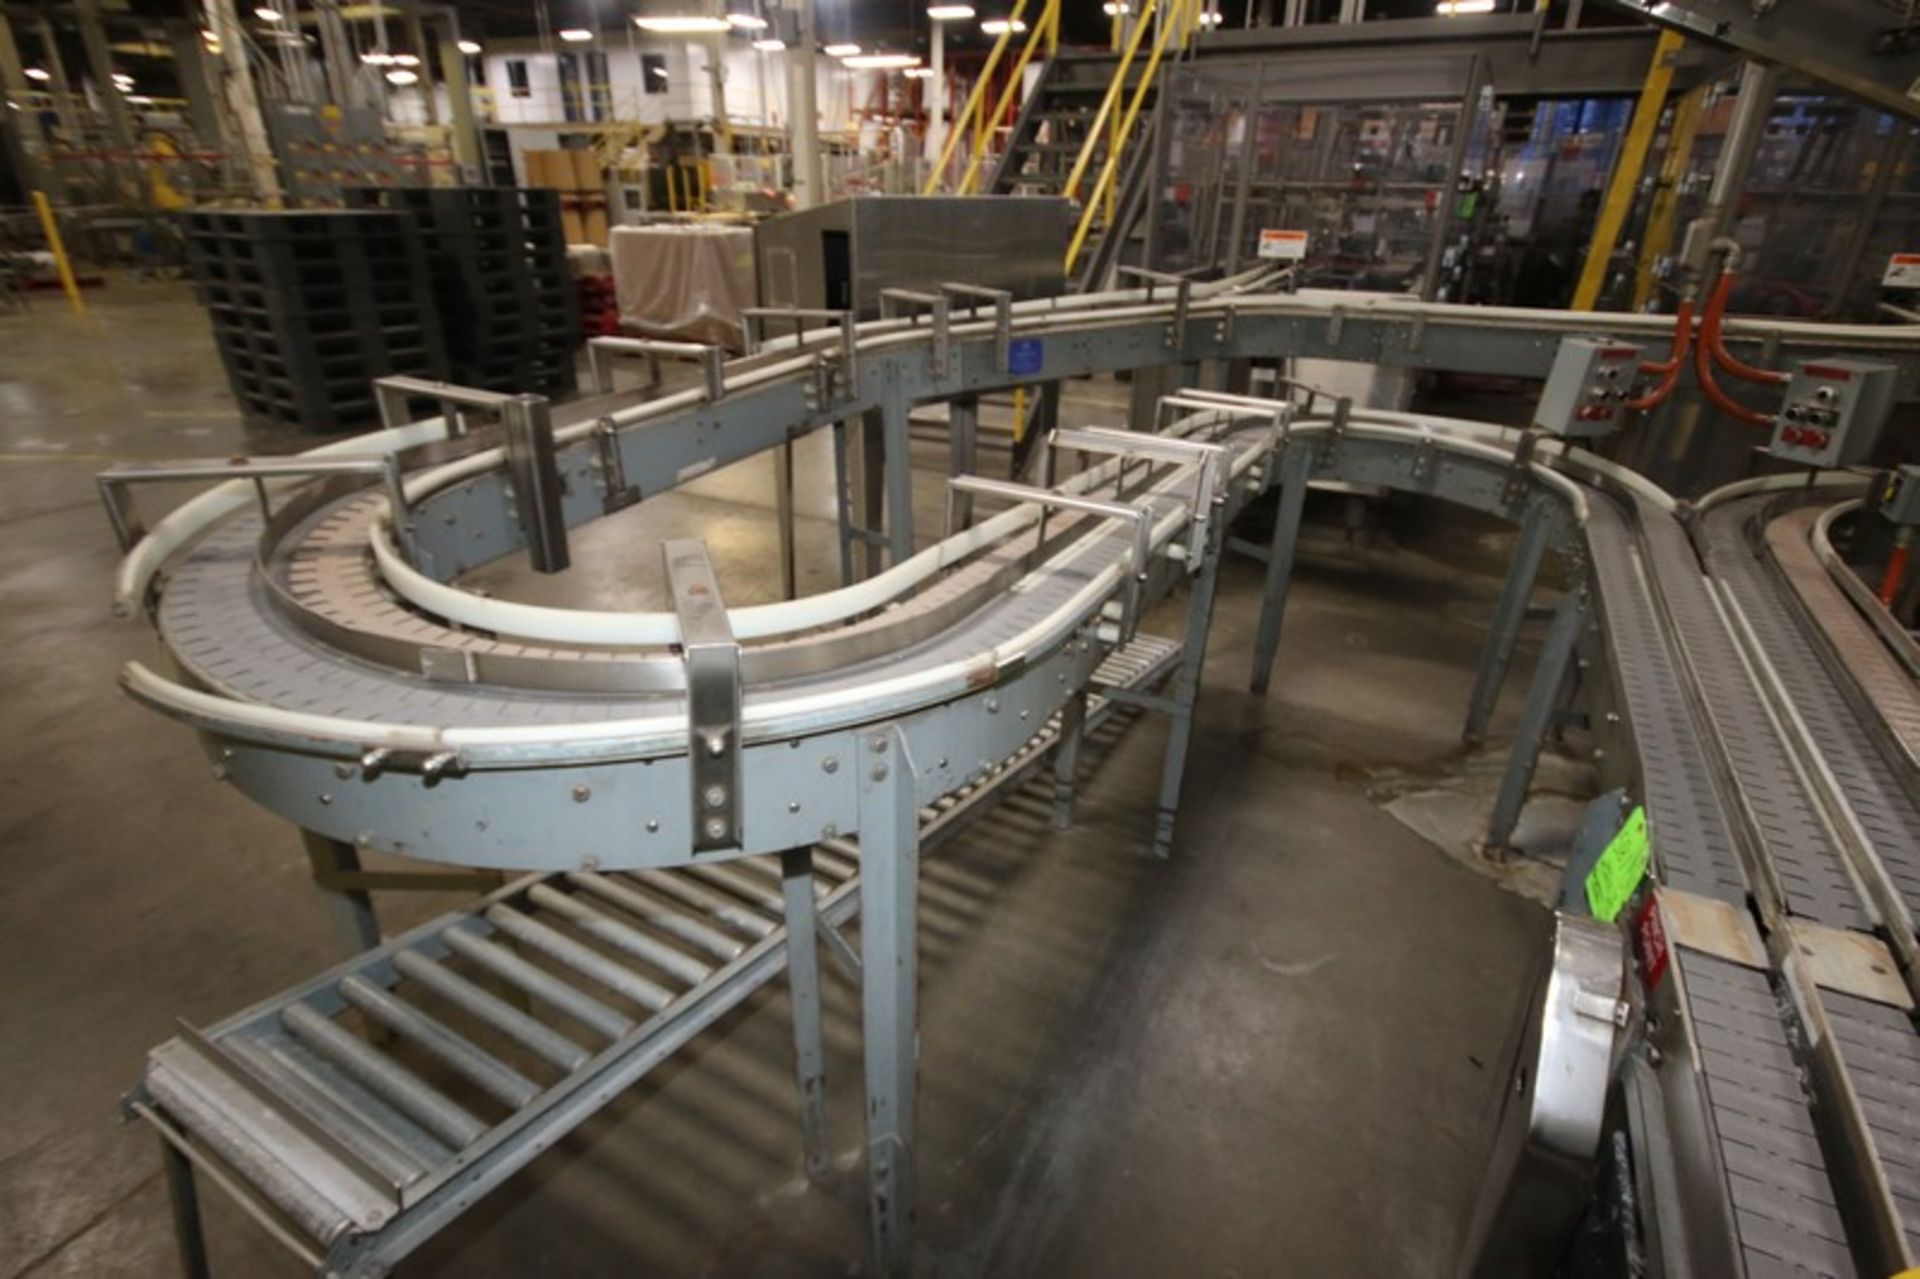 4-Sections of Nercon Infeed Product Conveyor, with Aprox. 3" W Plastic Chain, with Plastic Guide - Image 8 of 8